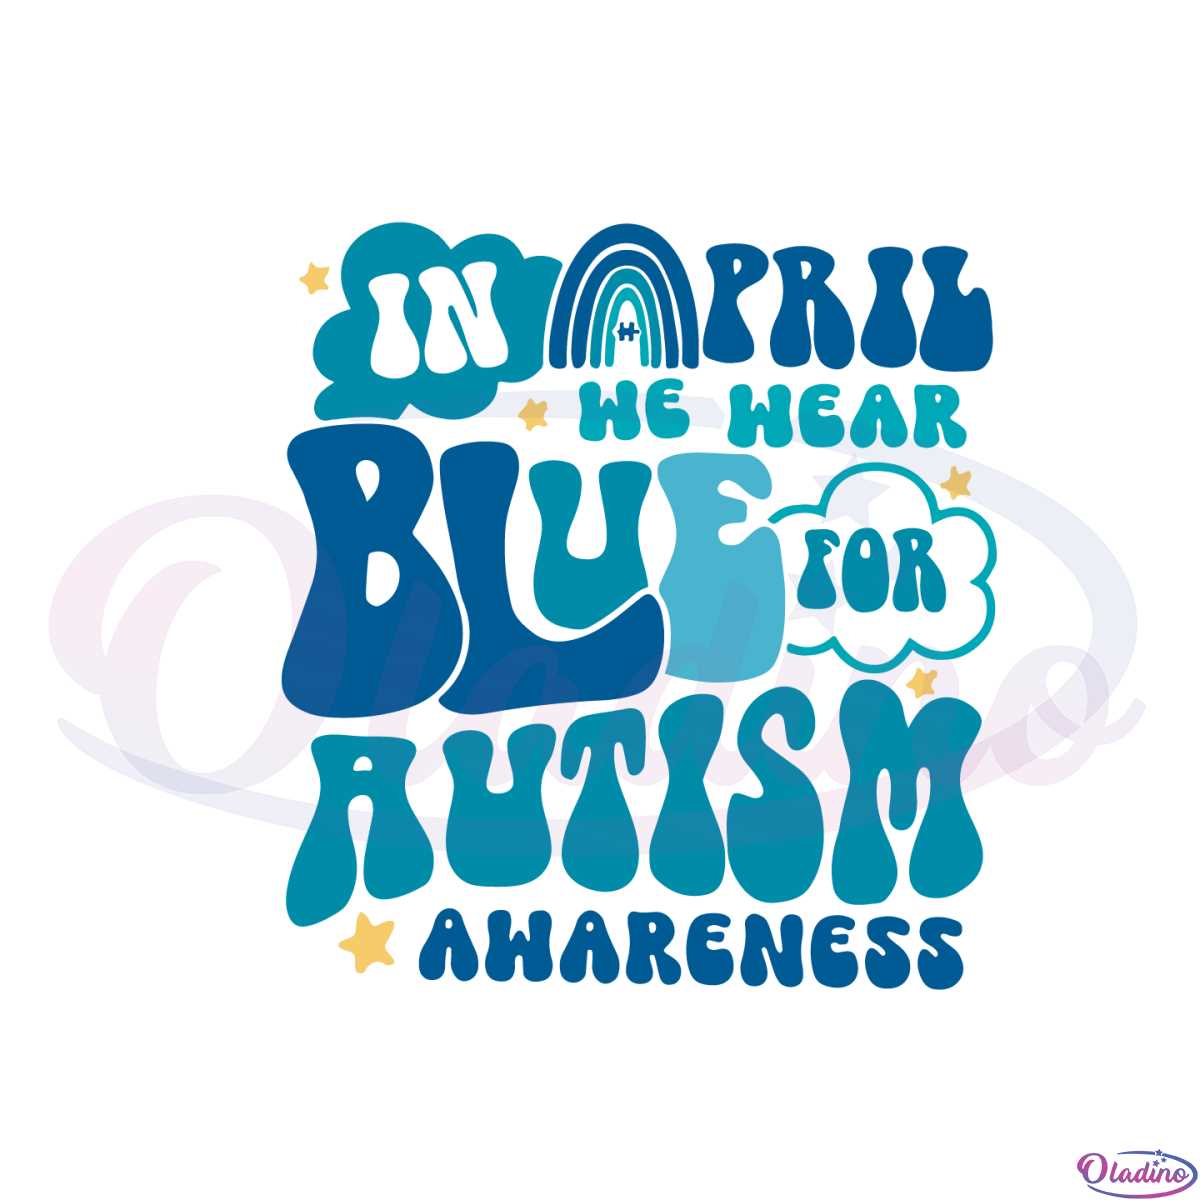 in-april-we-wear-blue-for-autism-awareness-rainbow-svg